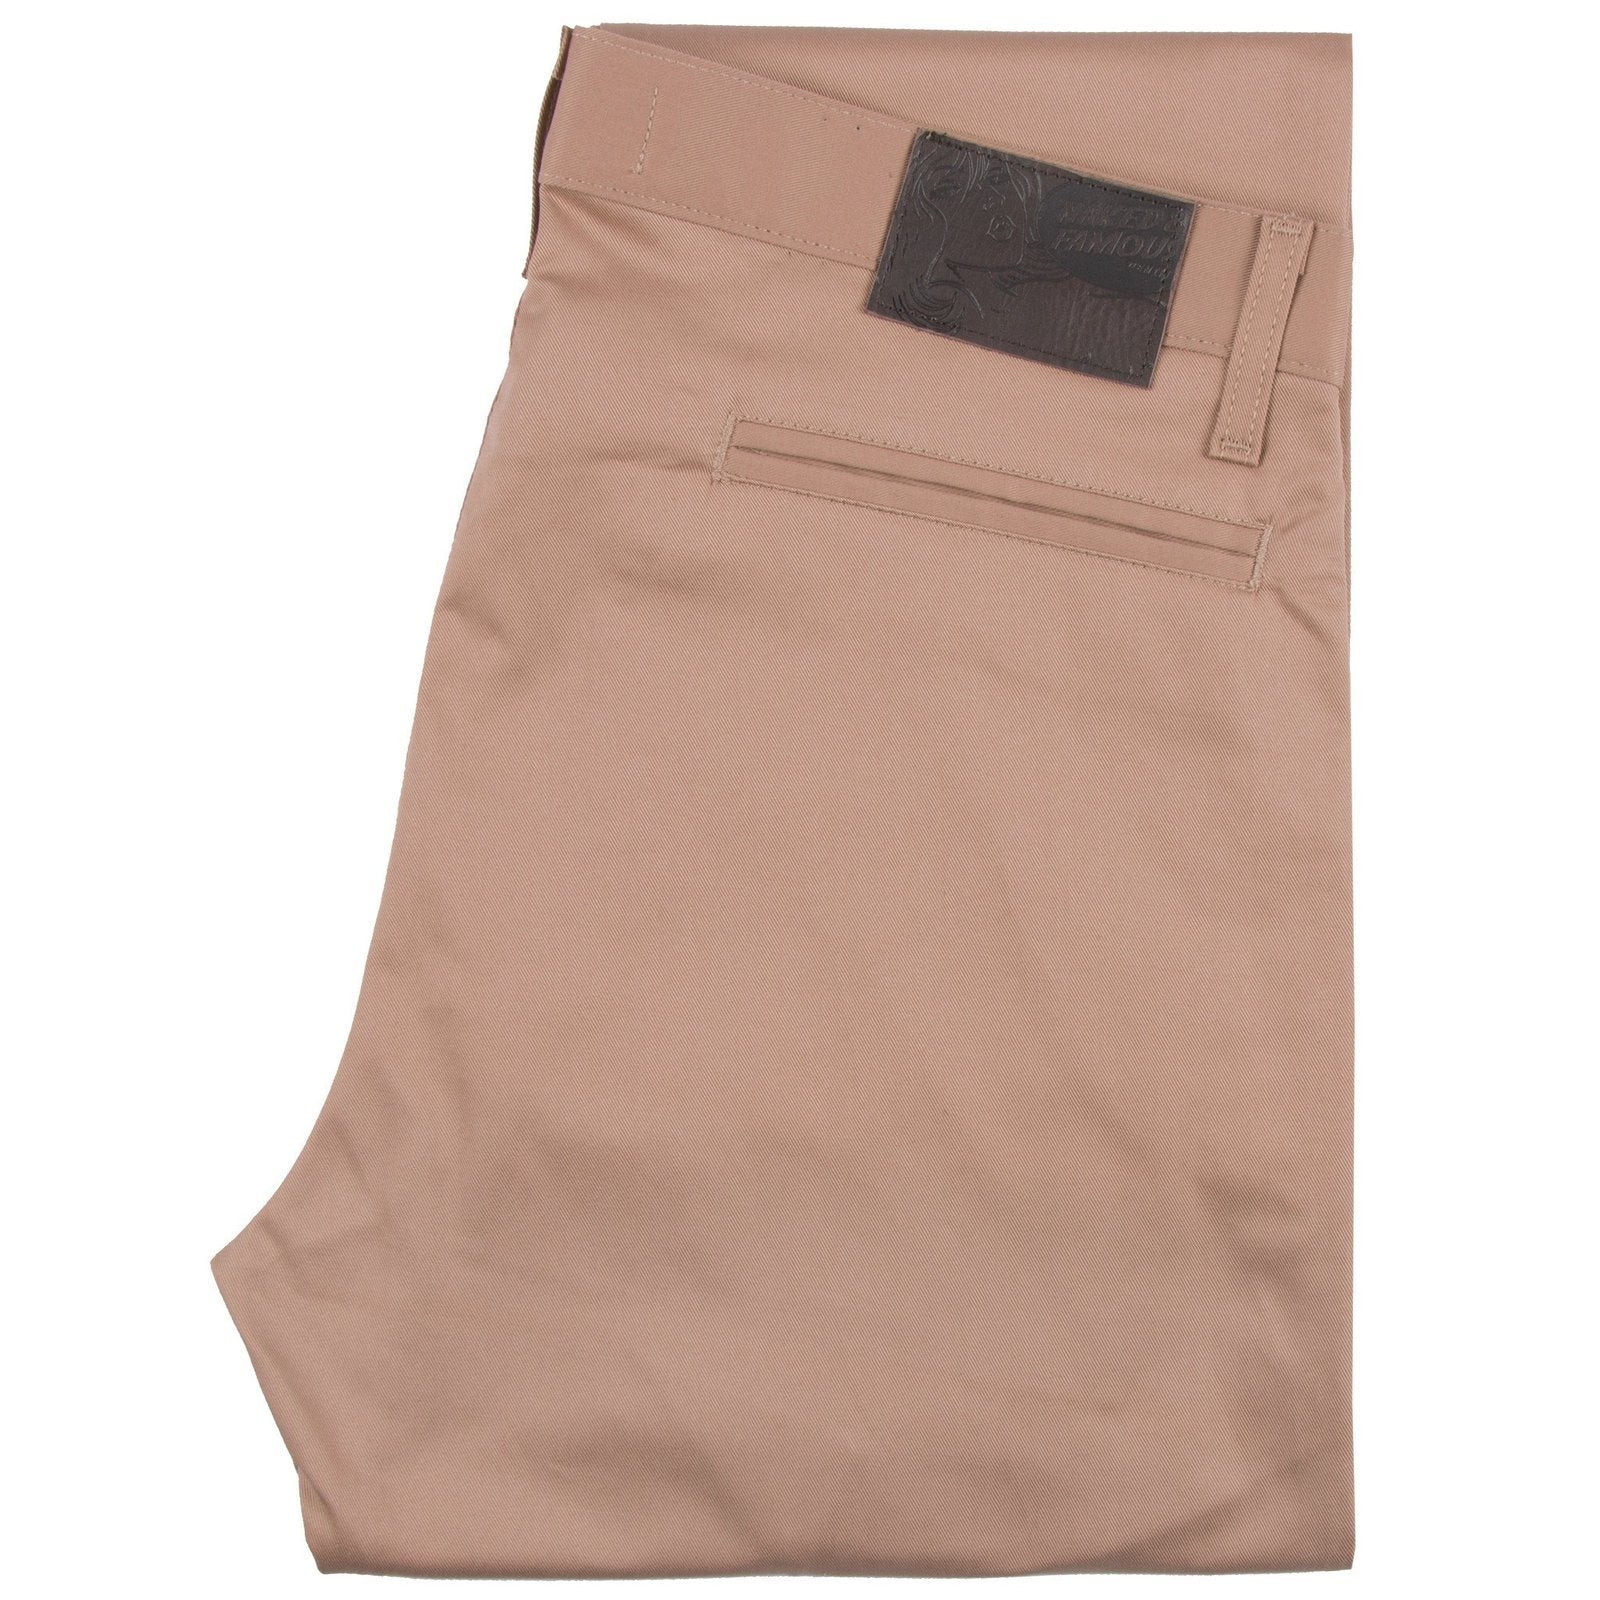 Naked & Famous - Slim Chino - Beige Stretch Twill - City Workshop Men's Supply Co.